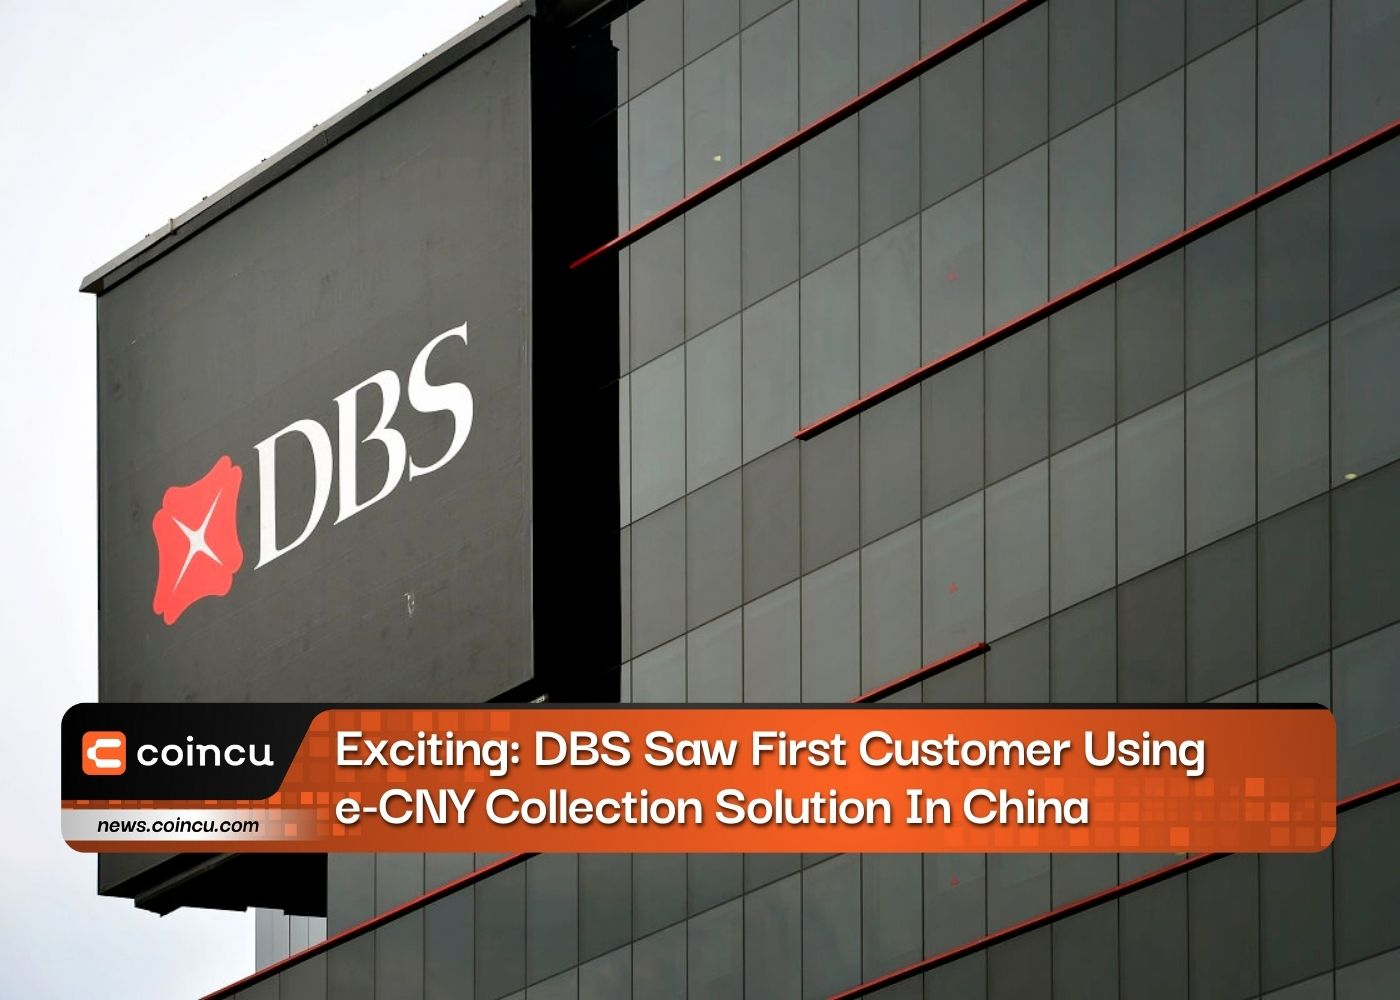 Exciting: DBS Saw First Customer Using e-CNY Collection Solution In China